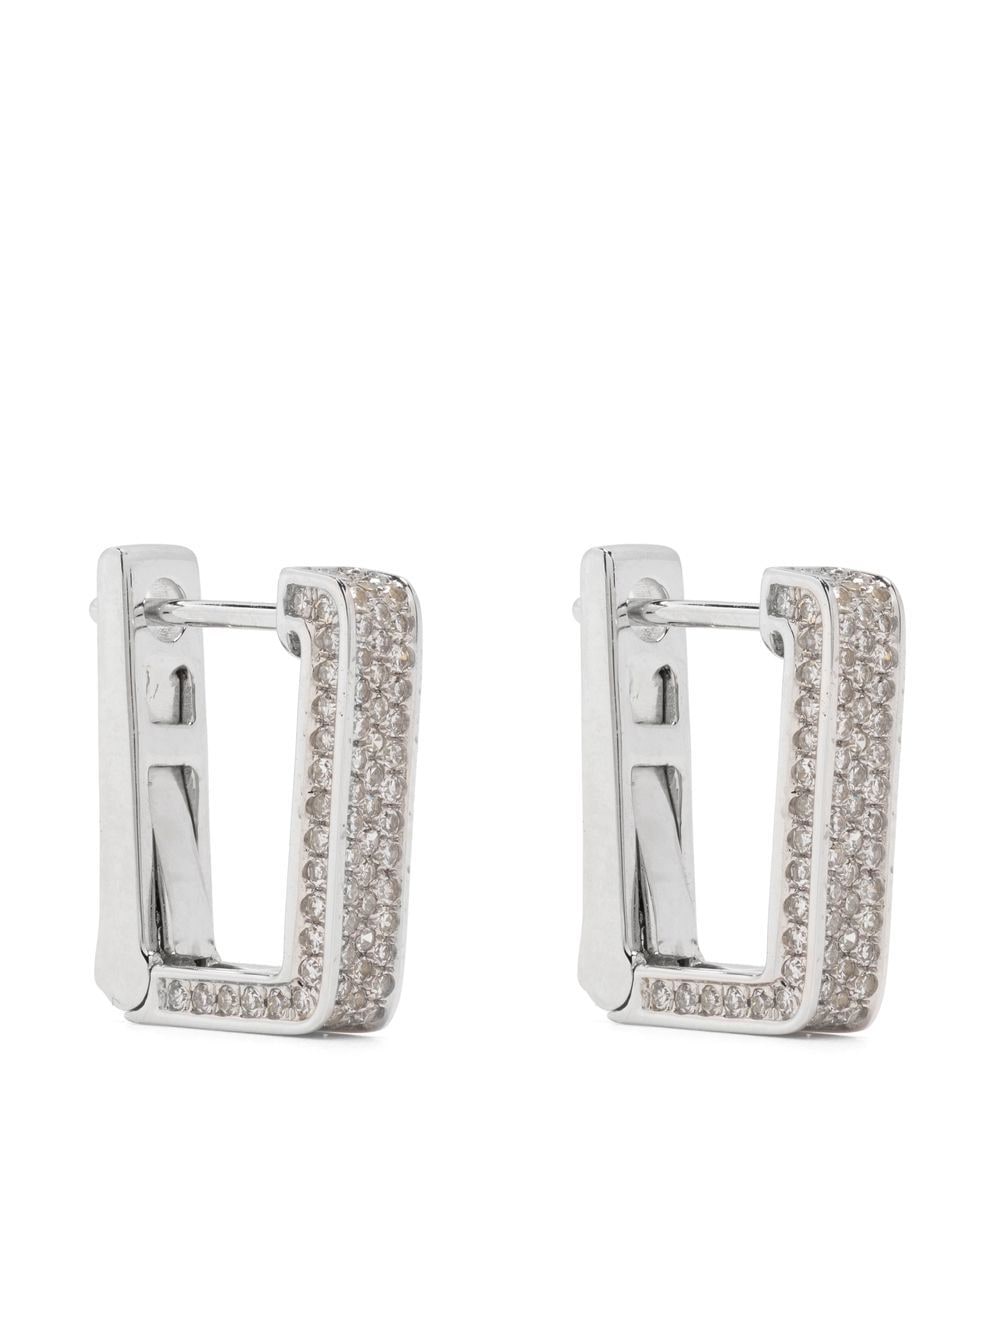 SHAY 18kt White Gold Deco pavé diamods earrings - Silver von SHAY